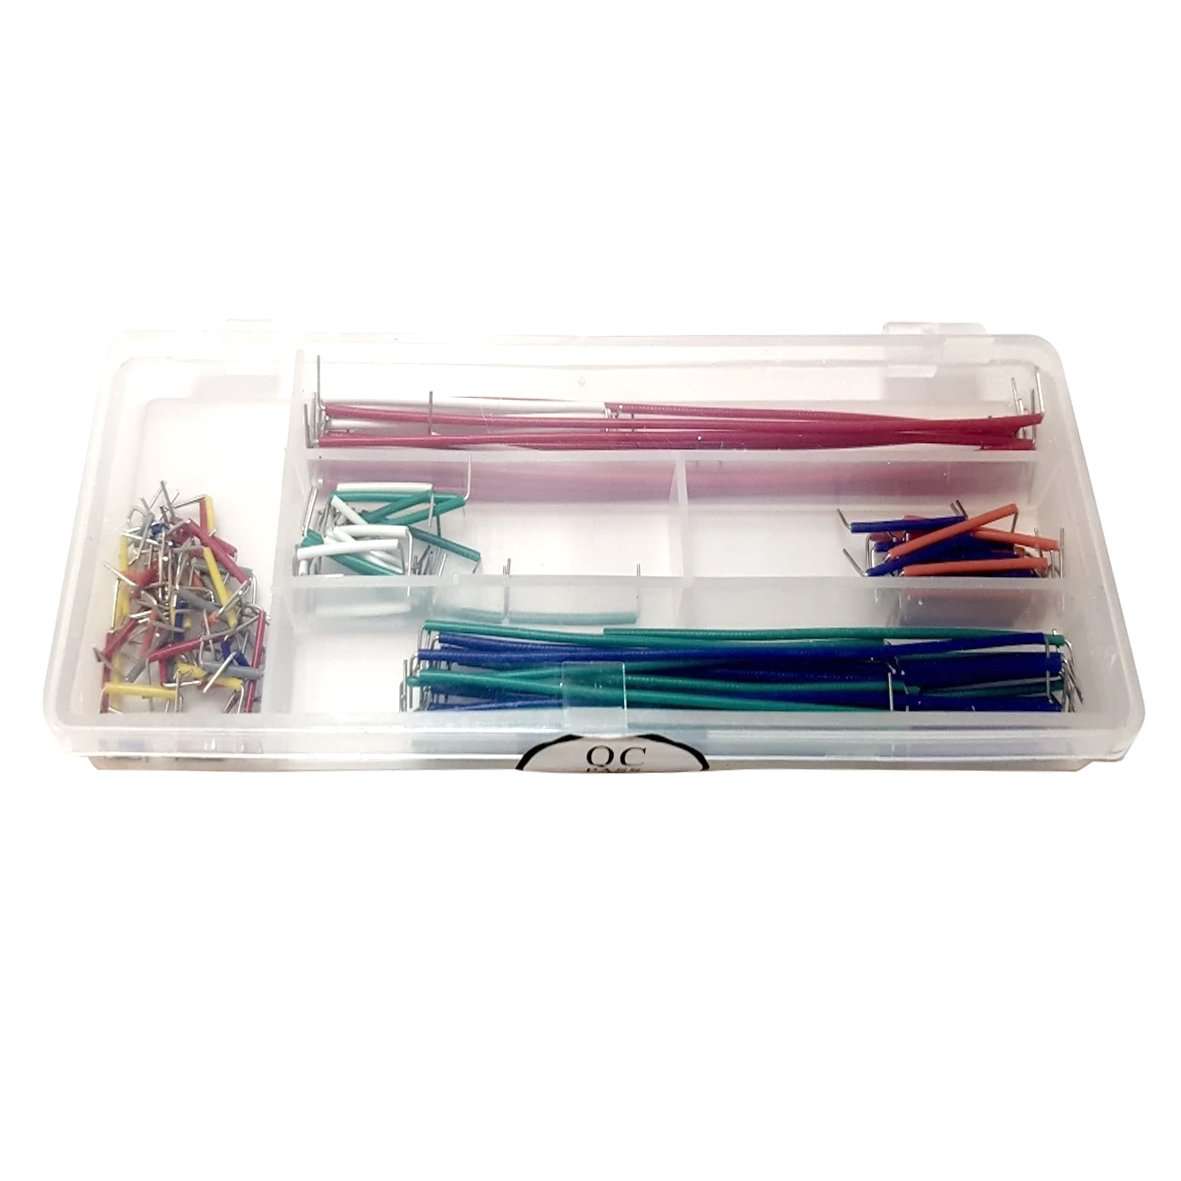 Breadboard Jumper Cable Kit - 140pc